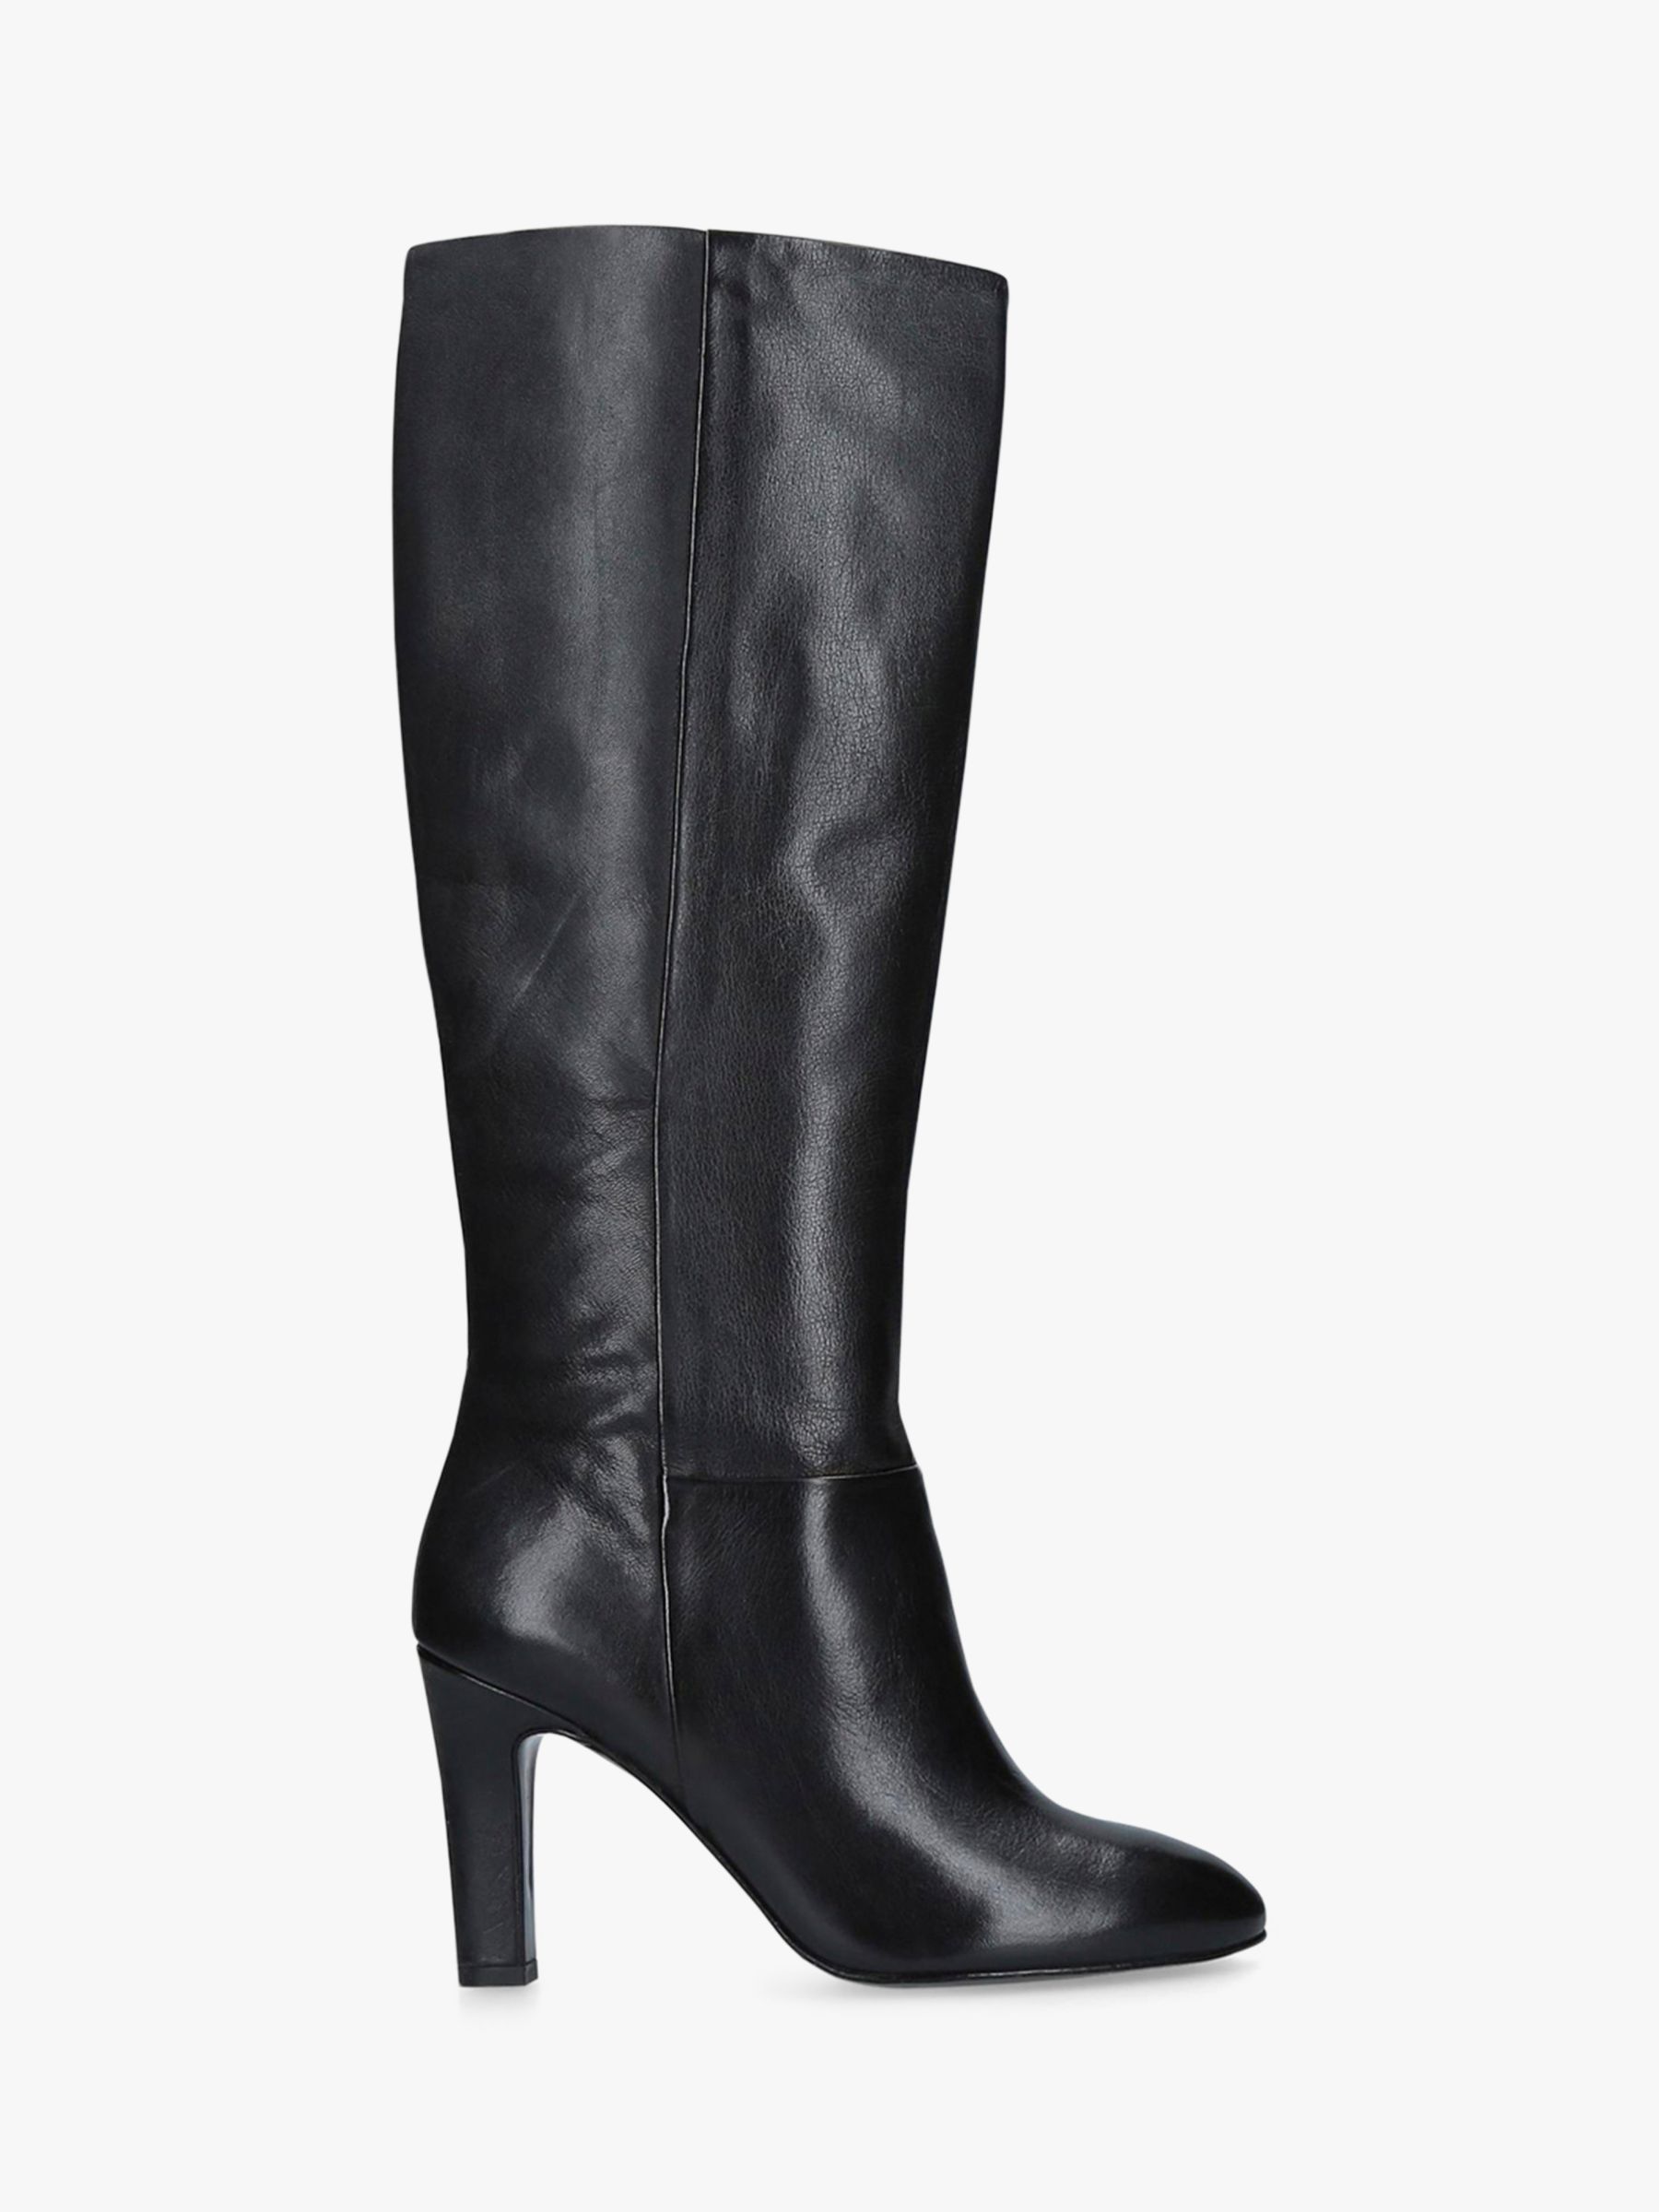 Carvela Where Leather Knee High Boots